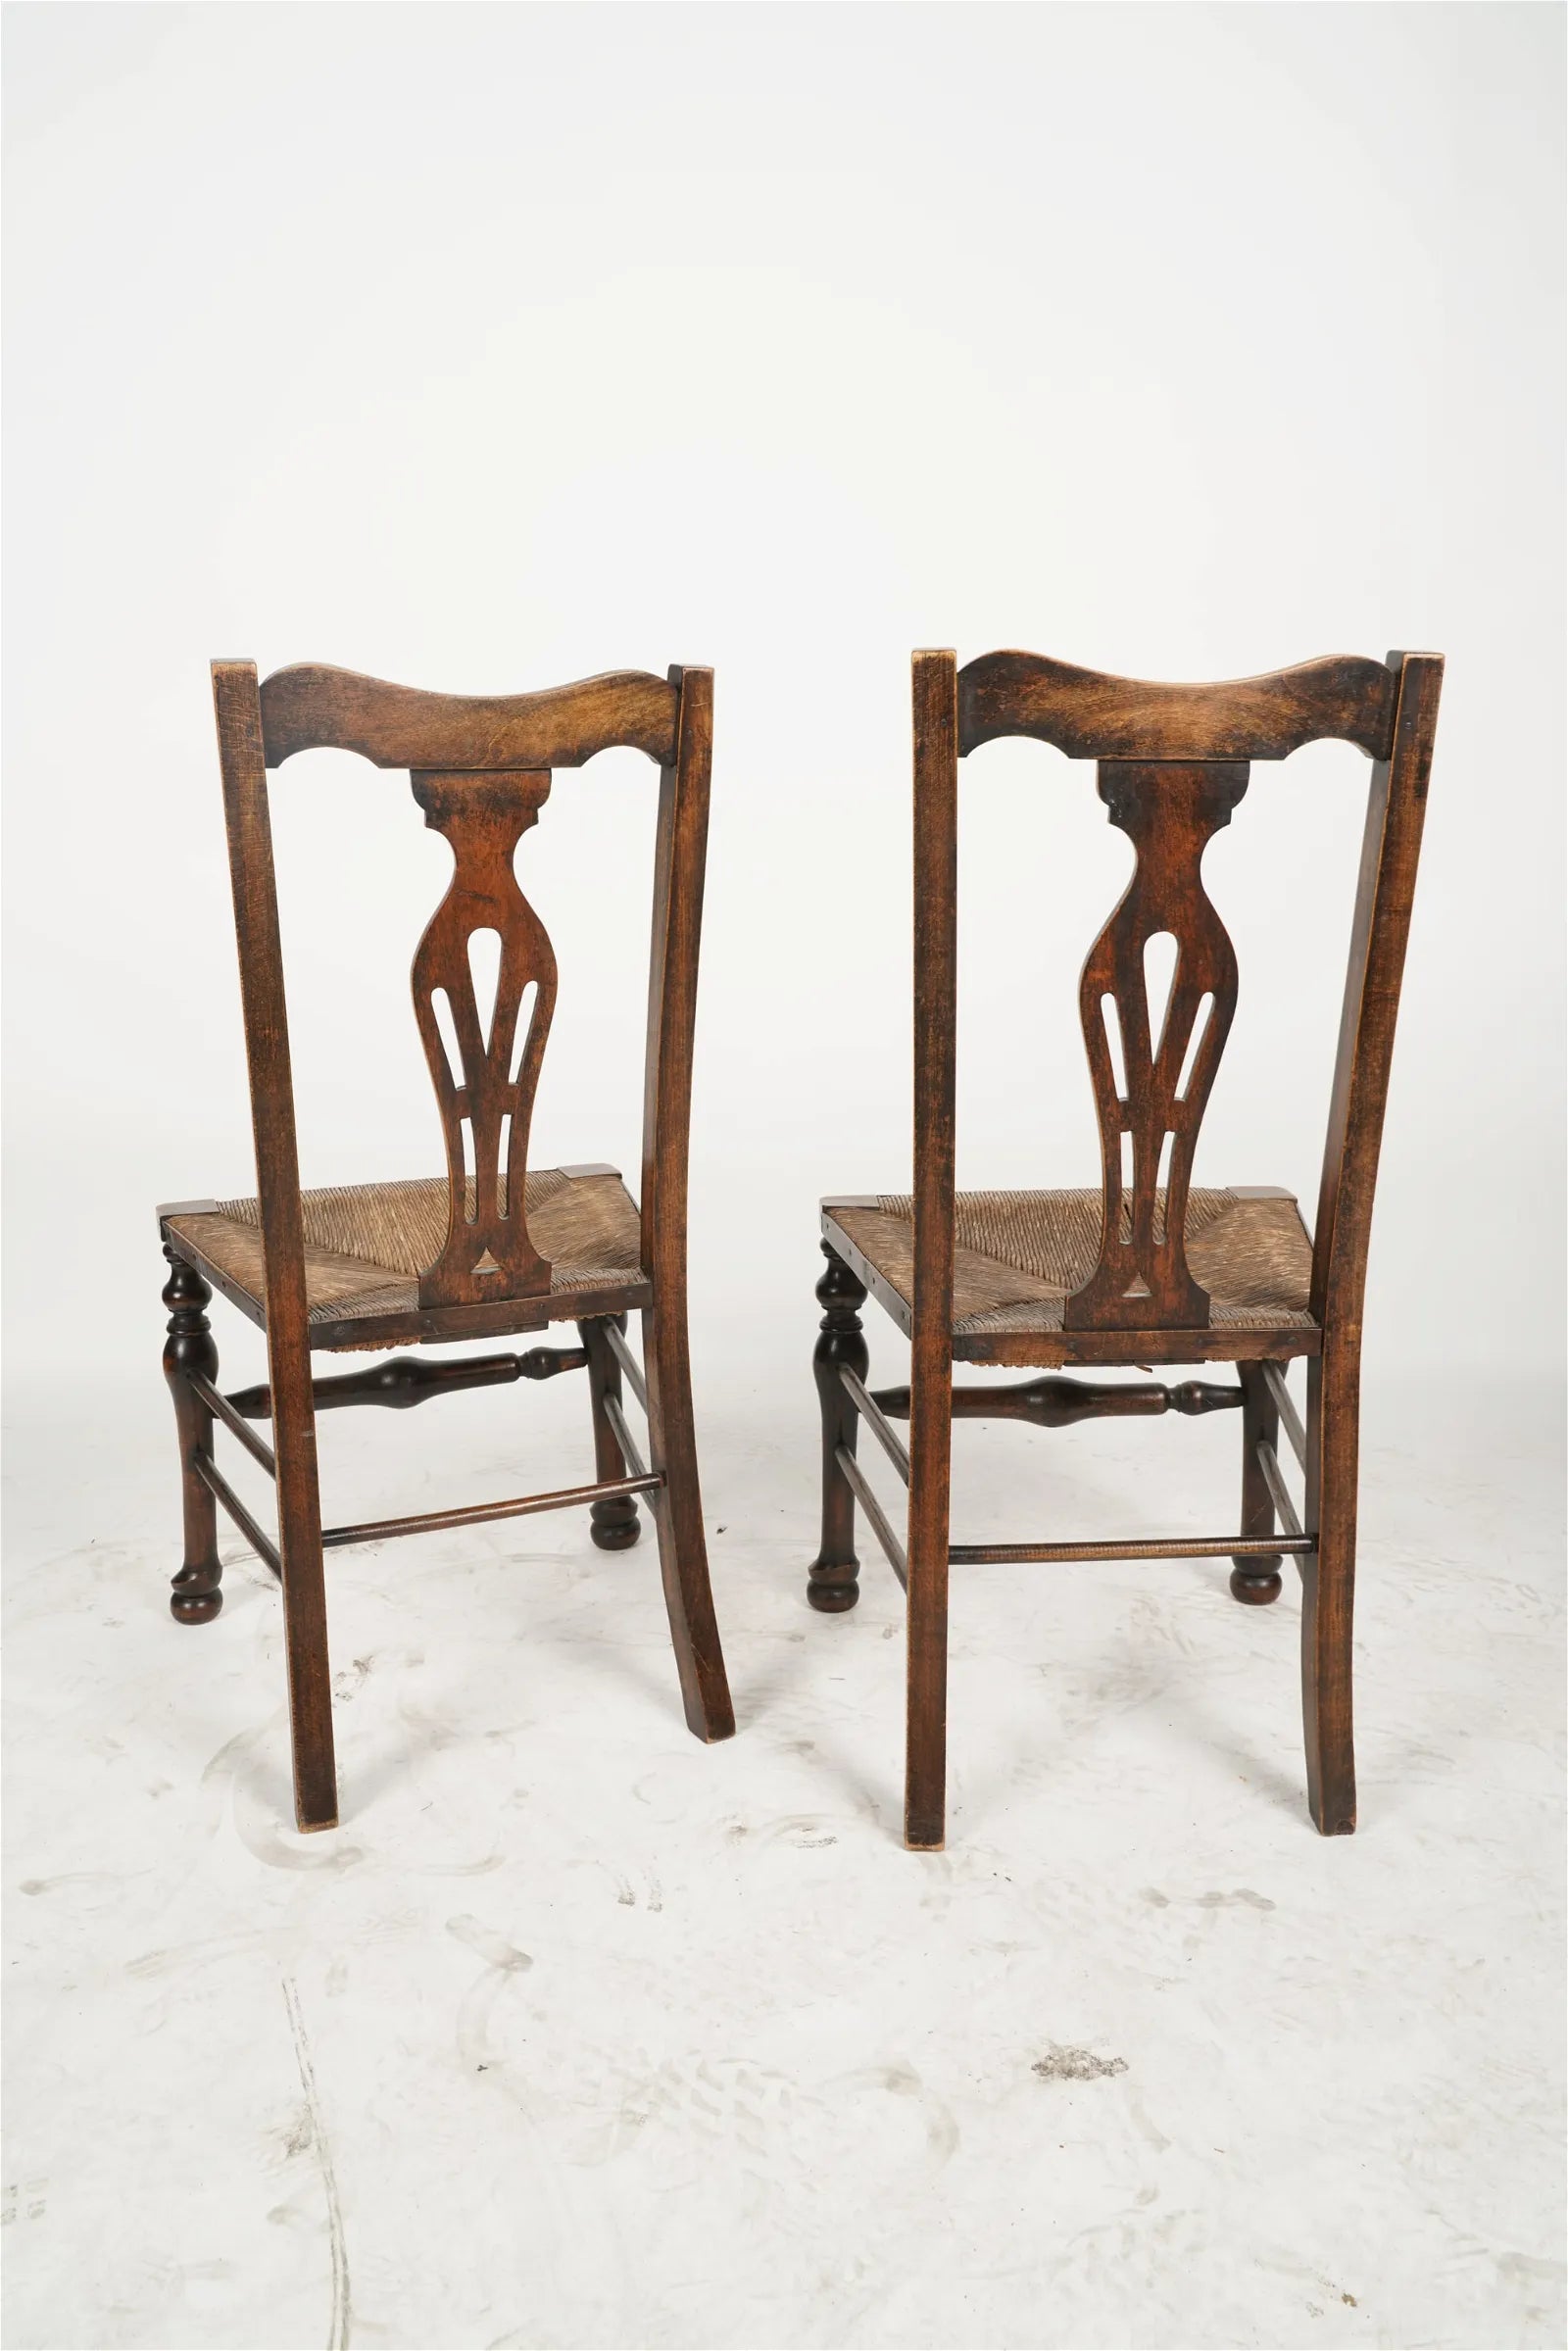 AF2-162: Antique Pair of Early 19th Century English Georgian Rush Seat Chairs